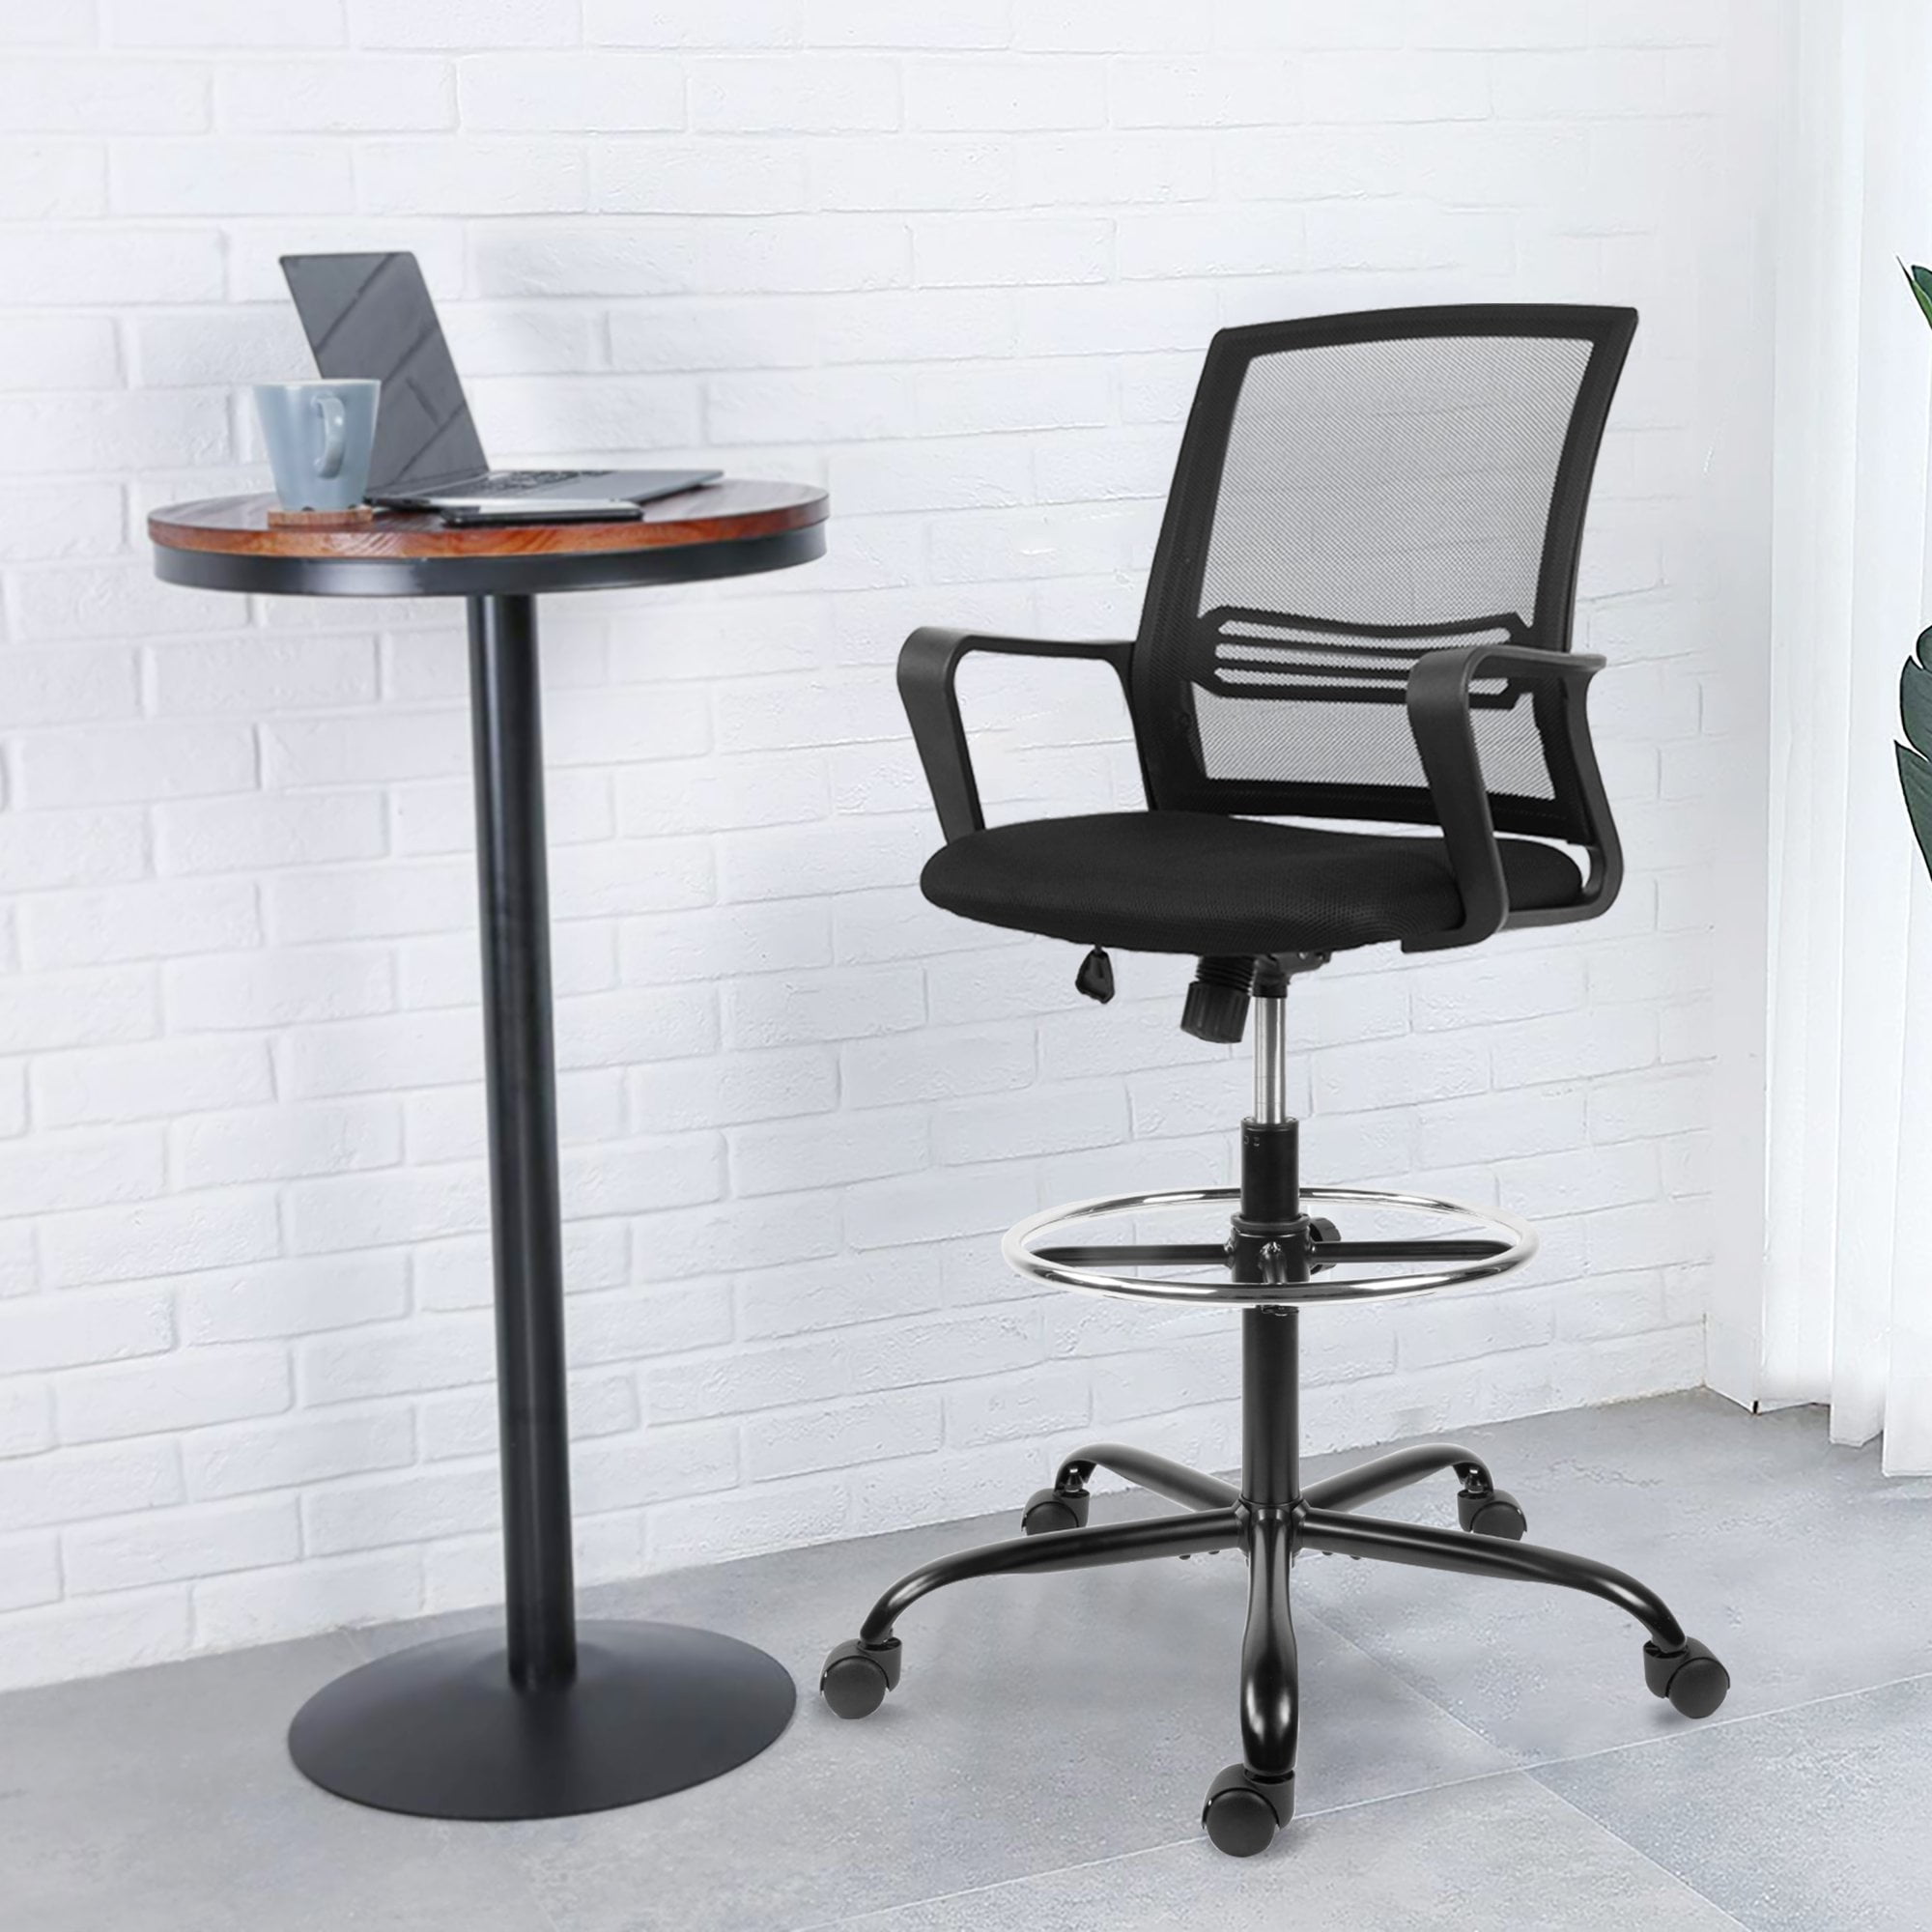 Mesh Drafting Chair Tall Office Chair Ergonomic Standing Desk Chair with Tilt Seat and Adjustable Foot Ring Black 